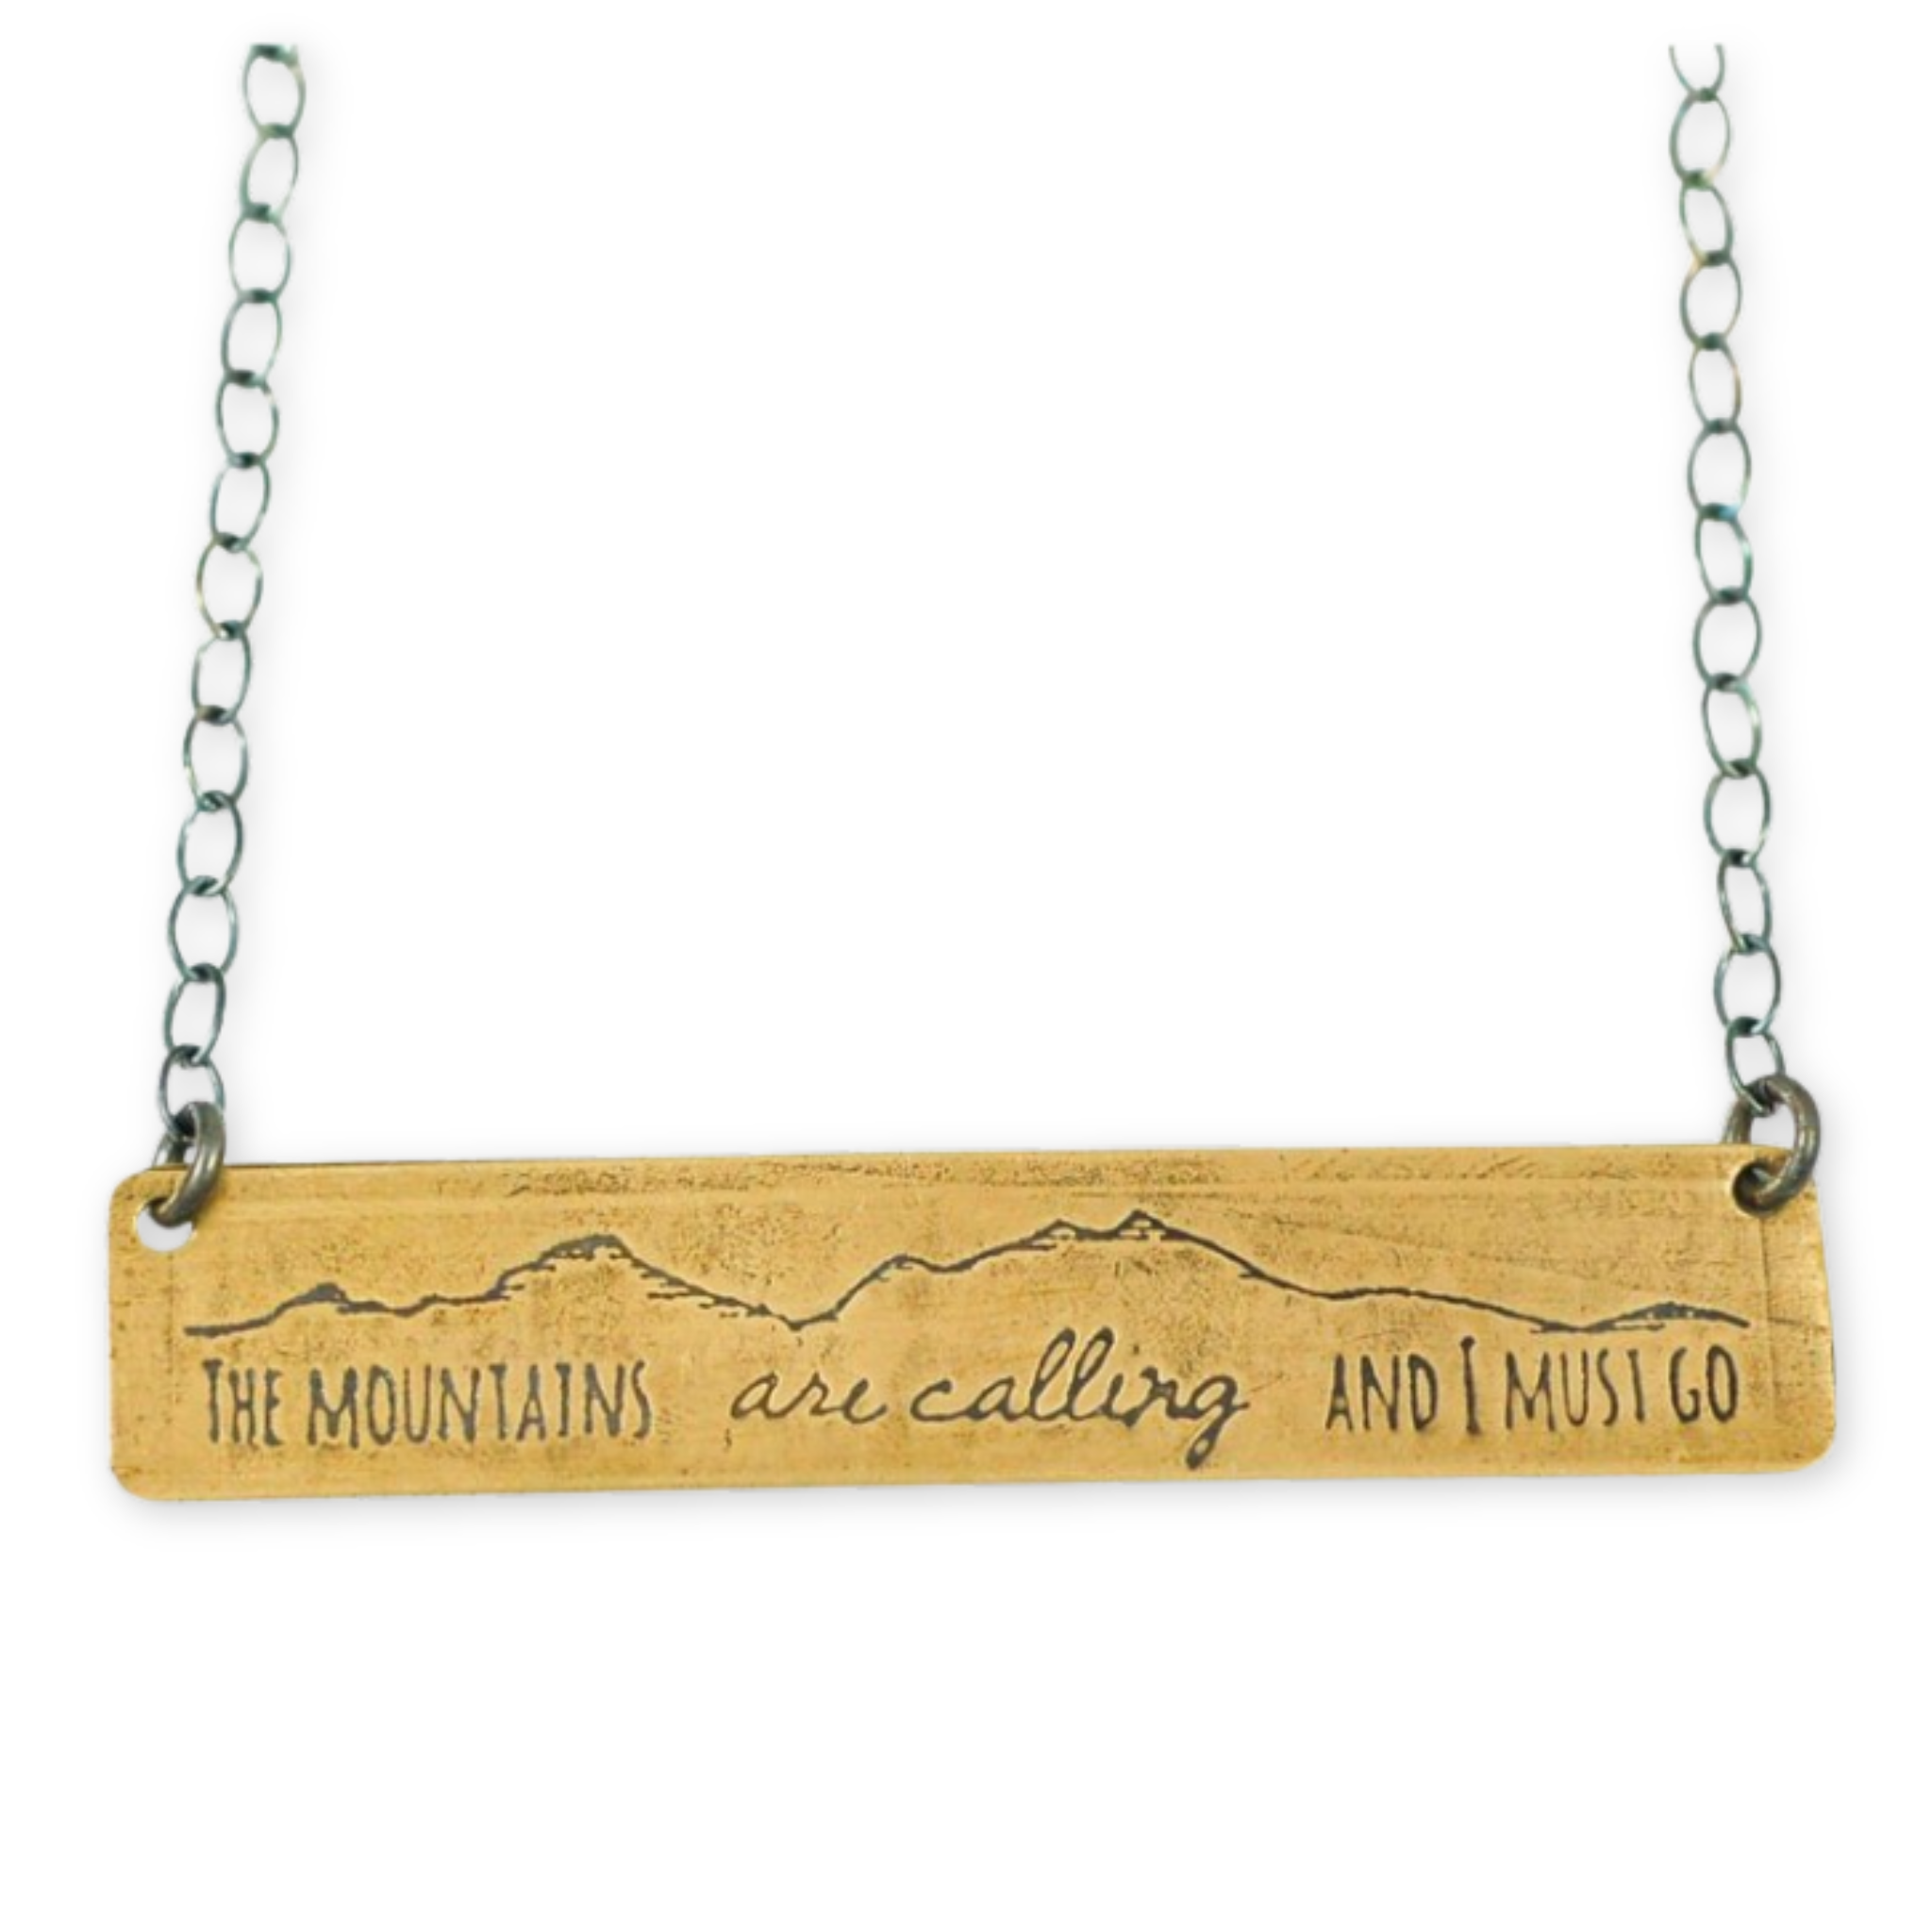 necklace with a long bar and the words the mountains are calling and I must go